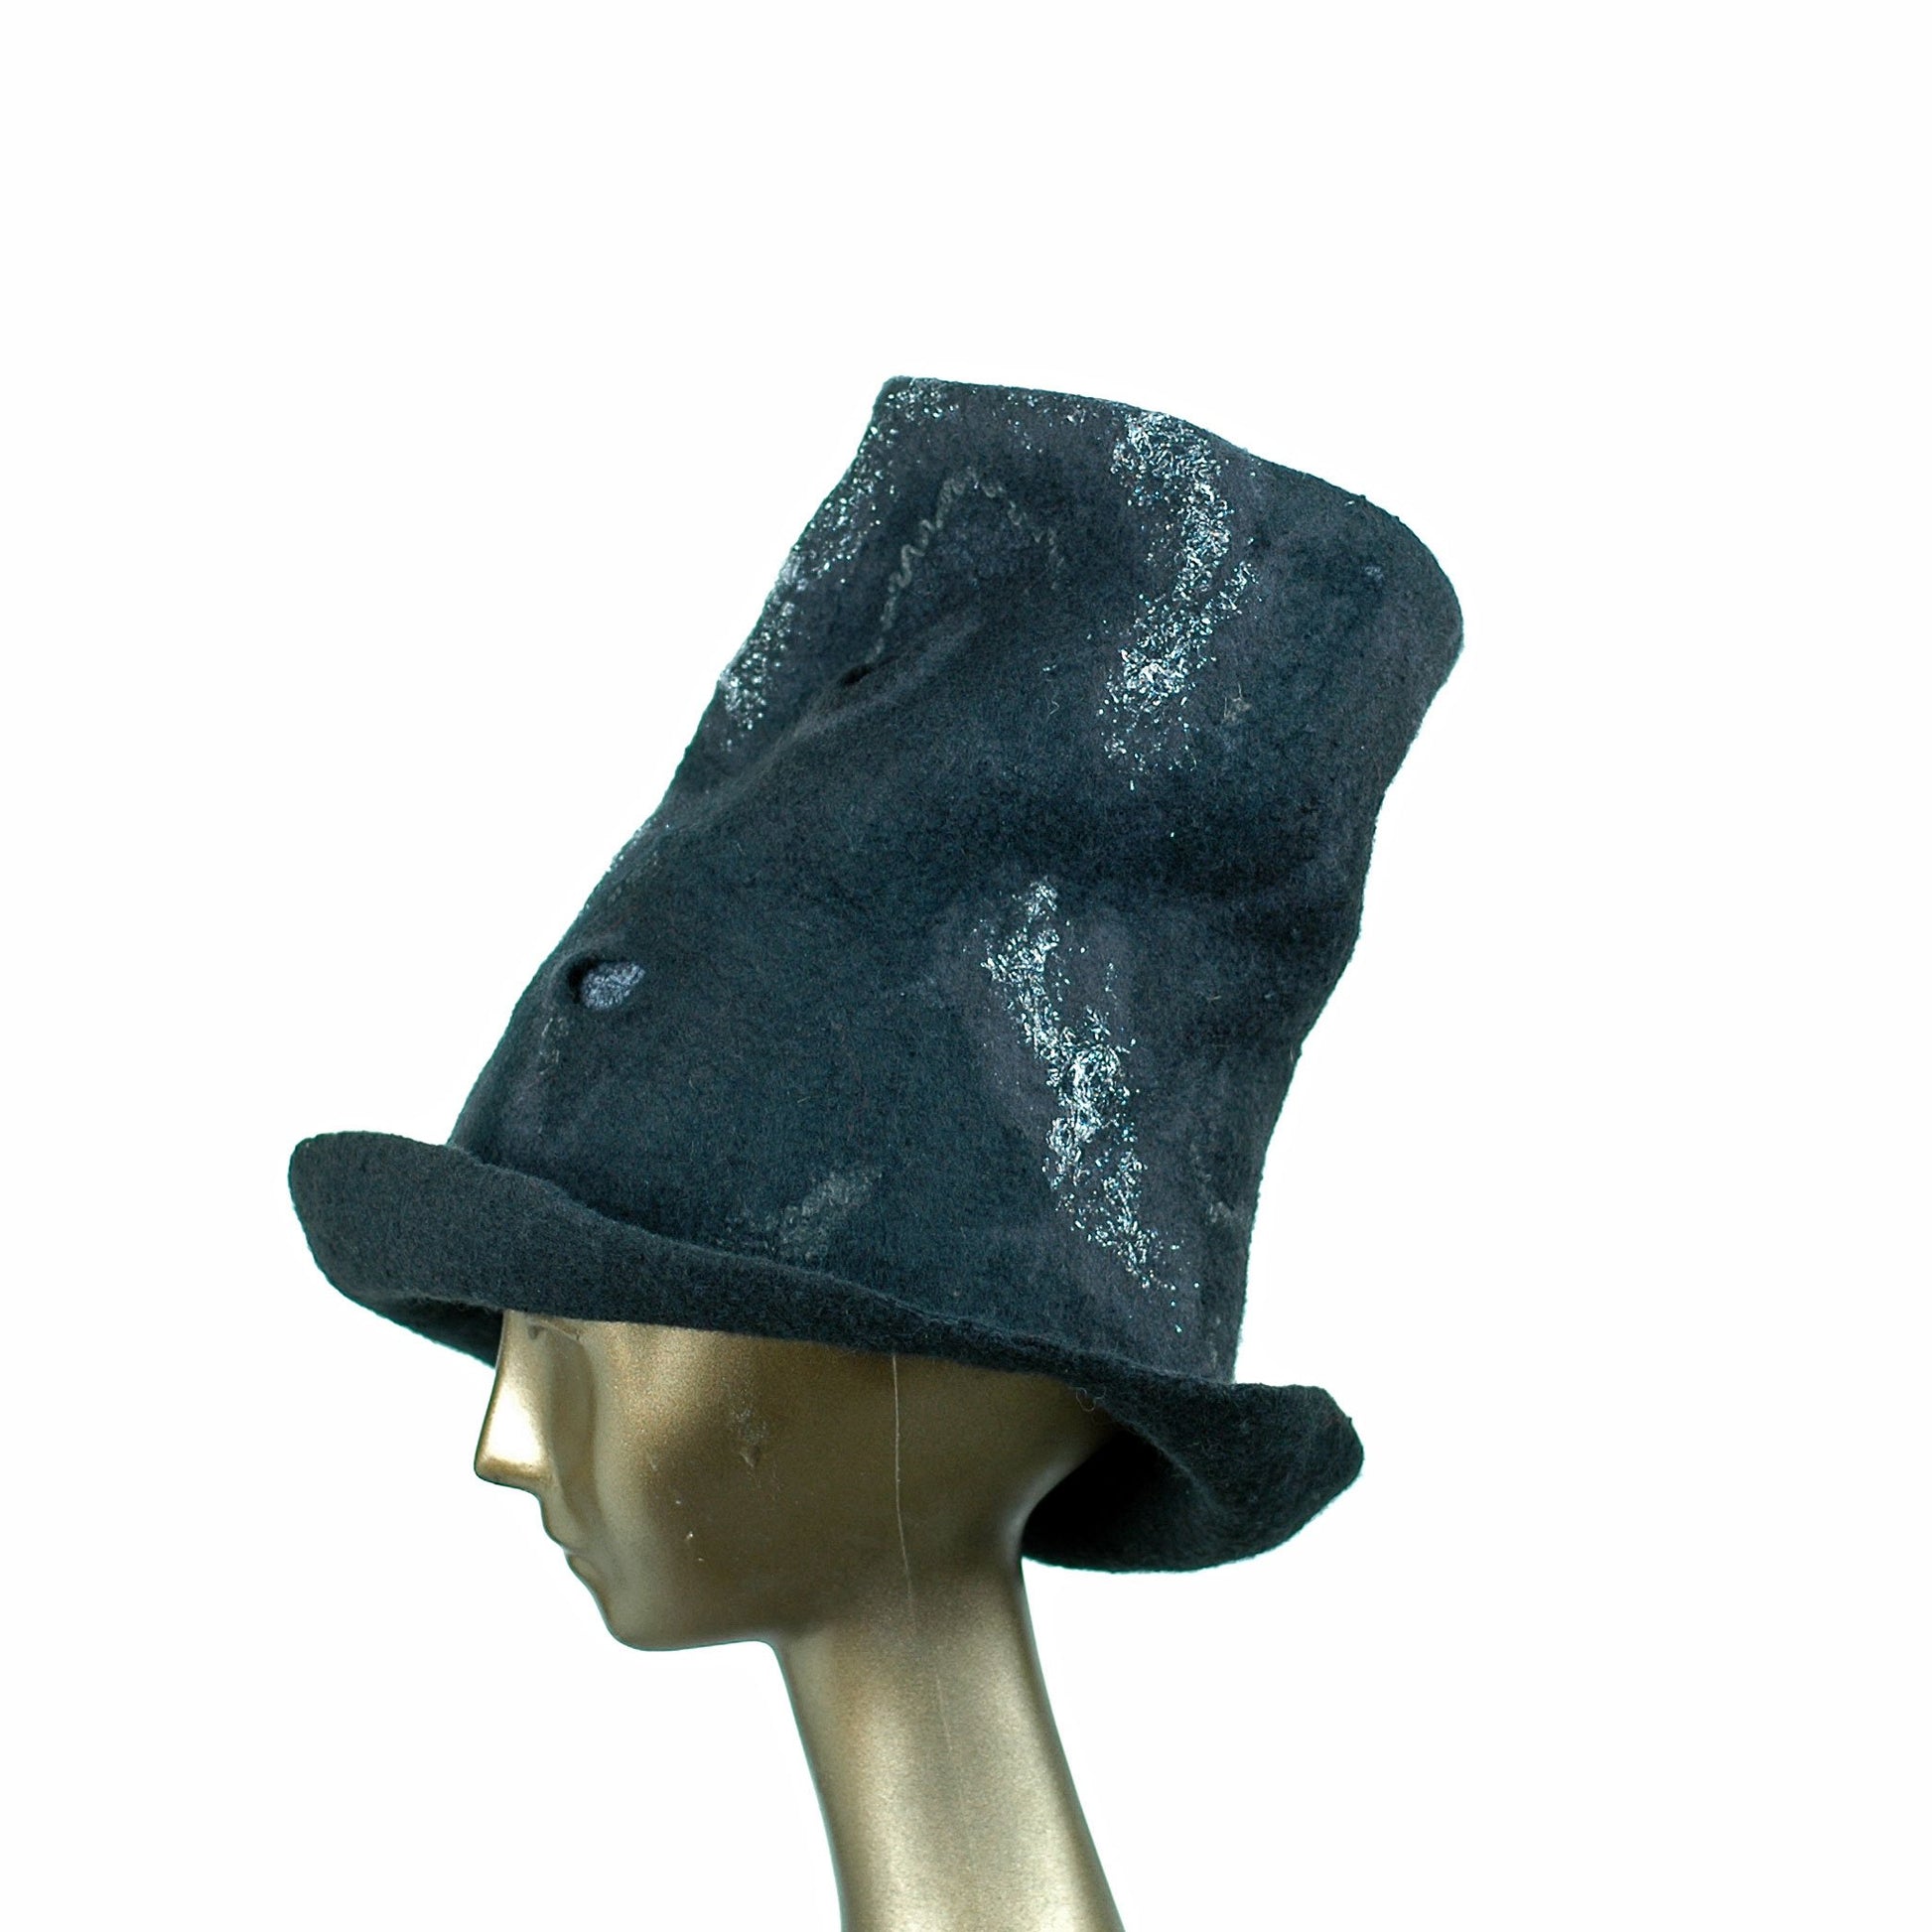 Tall Black Top Hat with Silver Nunofelted Lace - side view